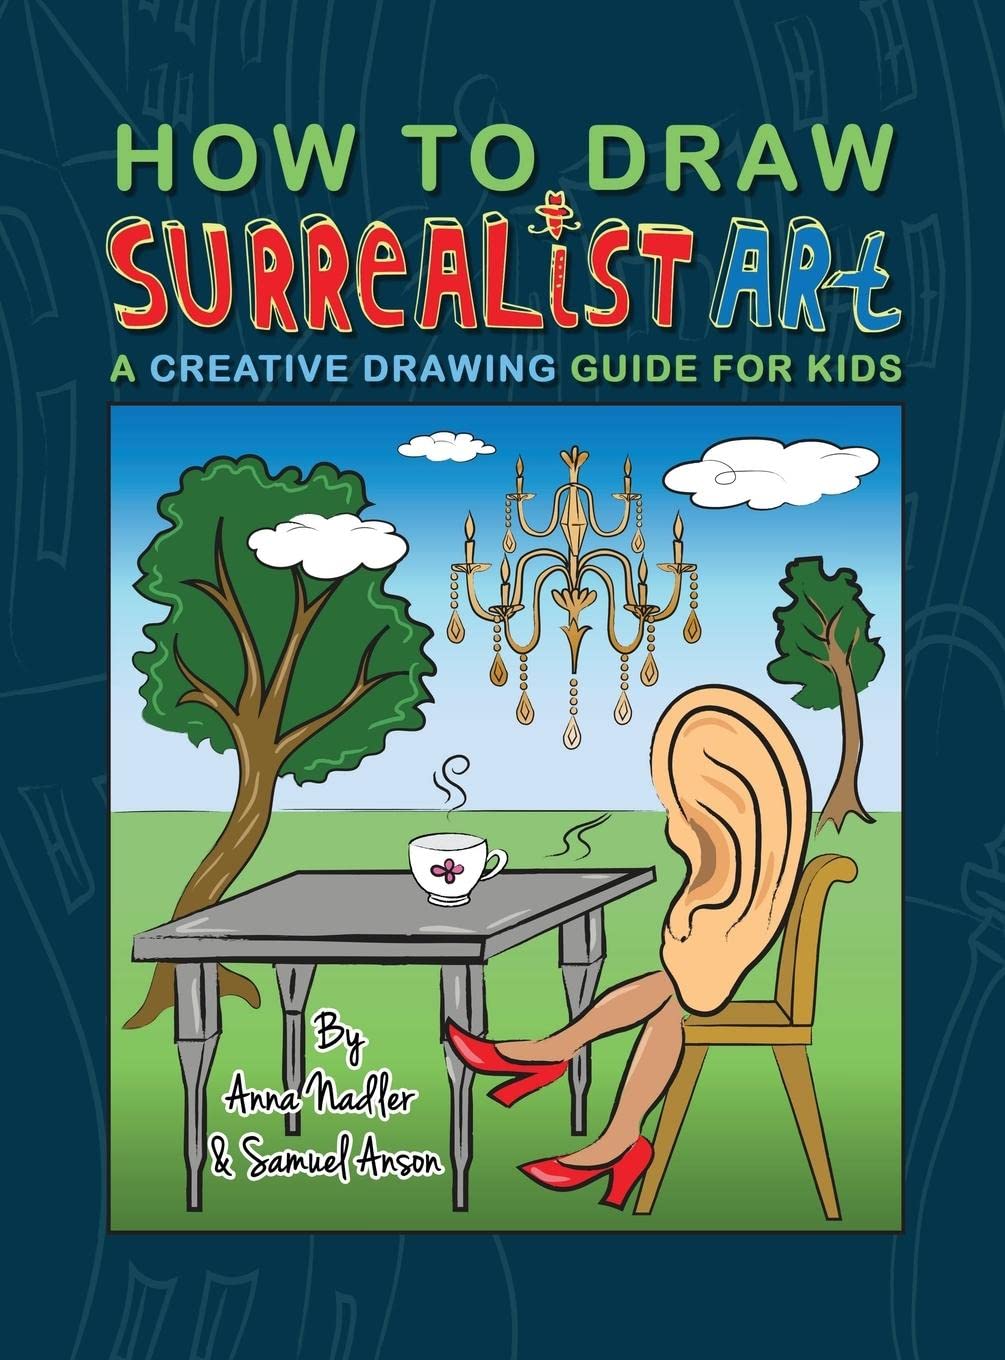 How To Draw Surrealist Art: A Creative Drawing Guide For Kids (How to Draw - For Kids and Adults)